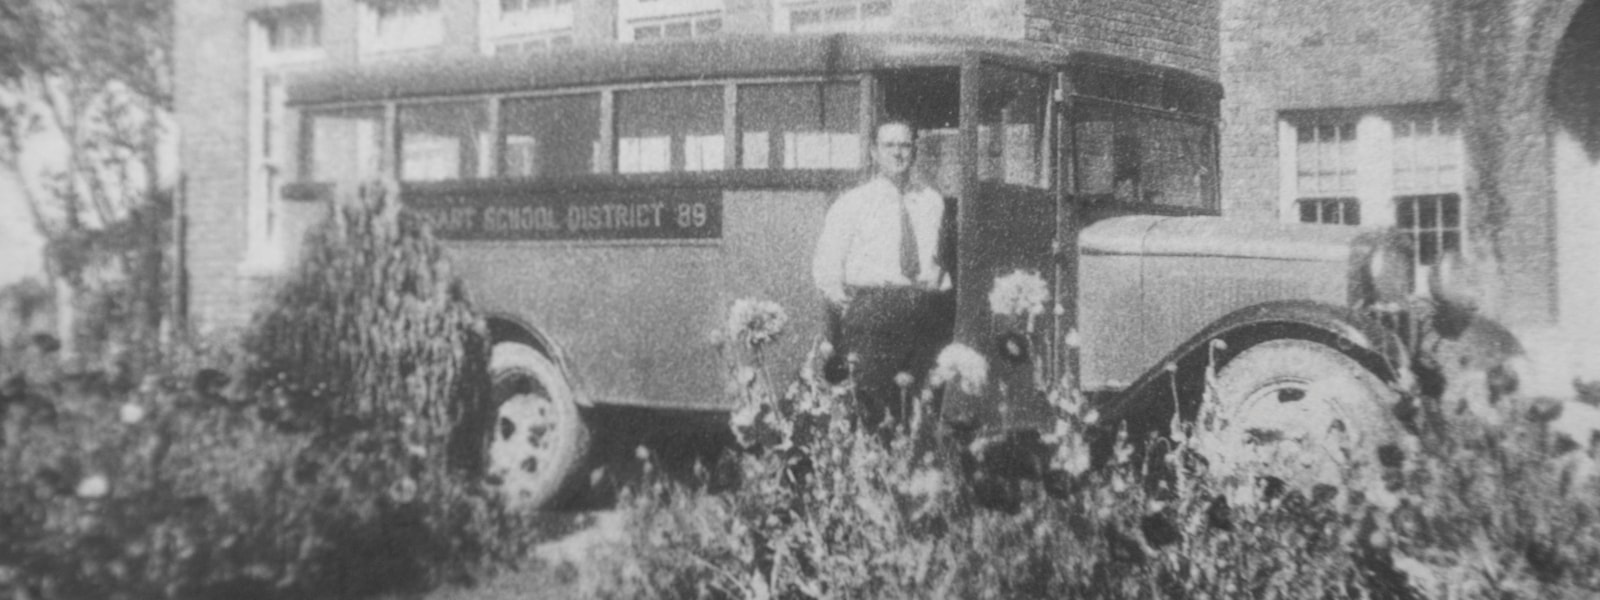 Historic photo of old Dysart bus with person standing next to it.